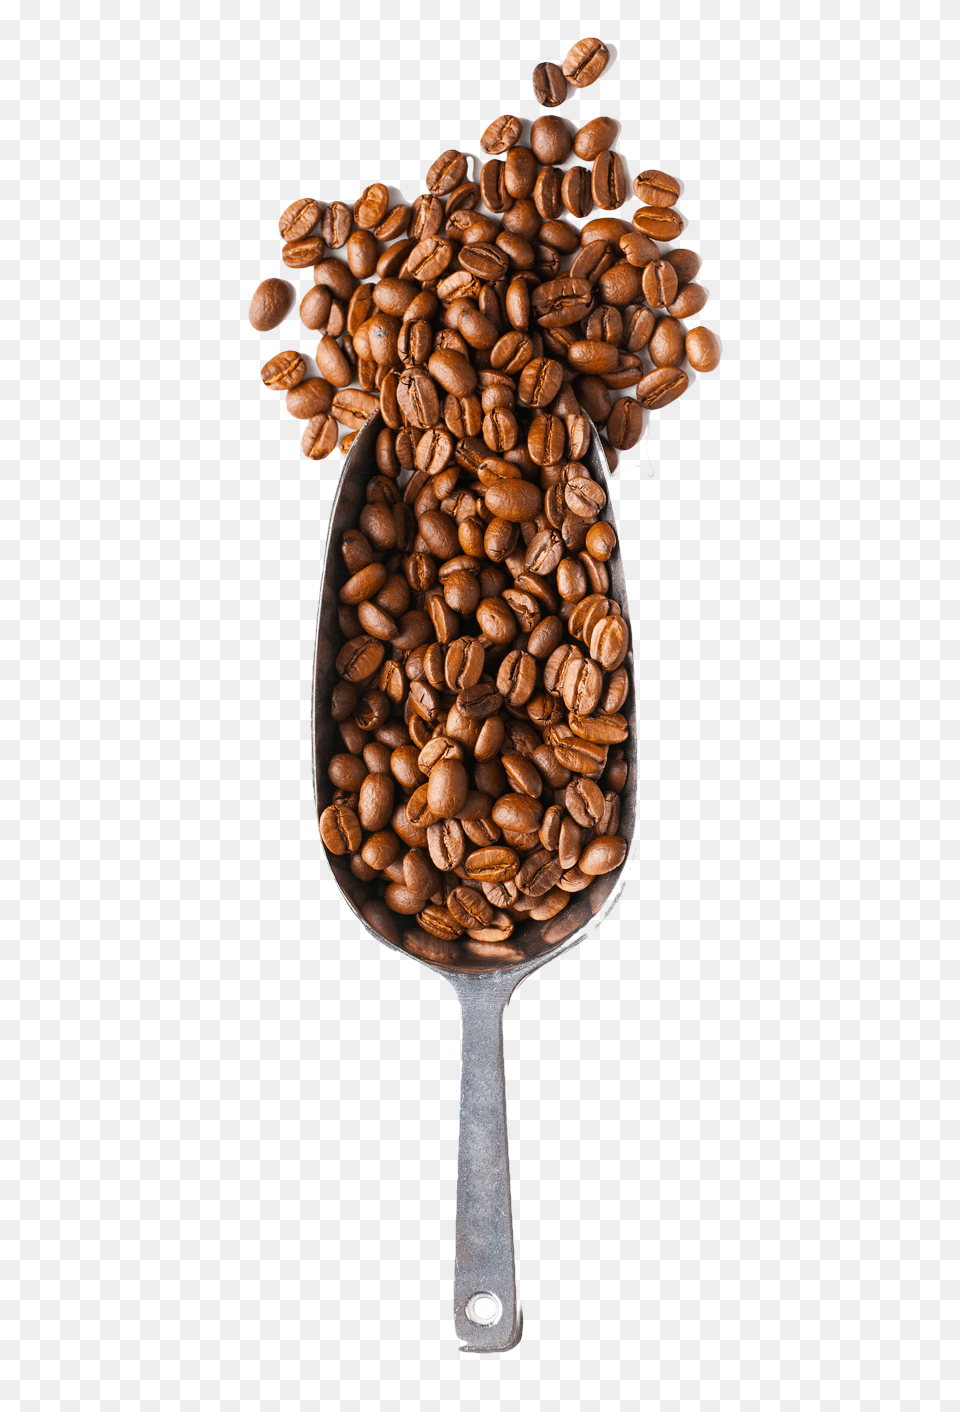 Coffee Beans And Spoon Download Coffee Beans Spoon, Beverage, Plant Png Image